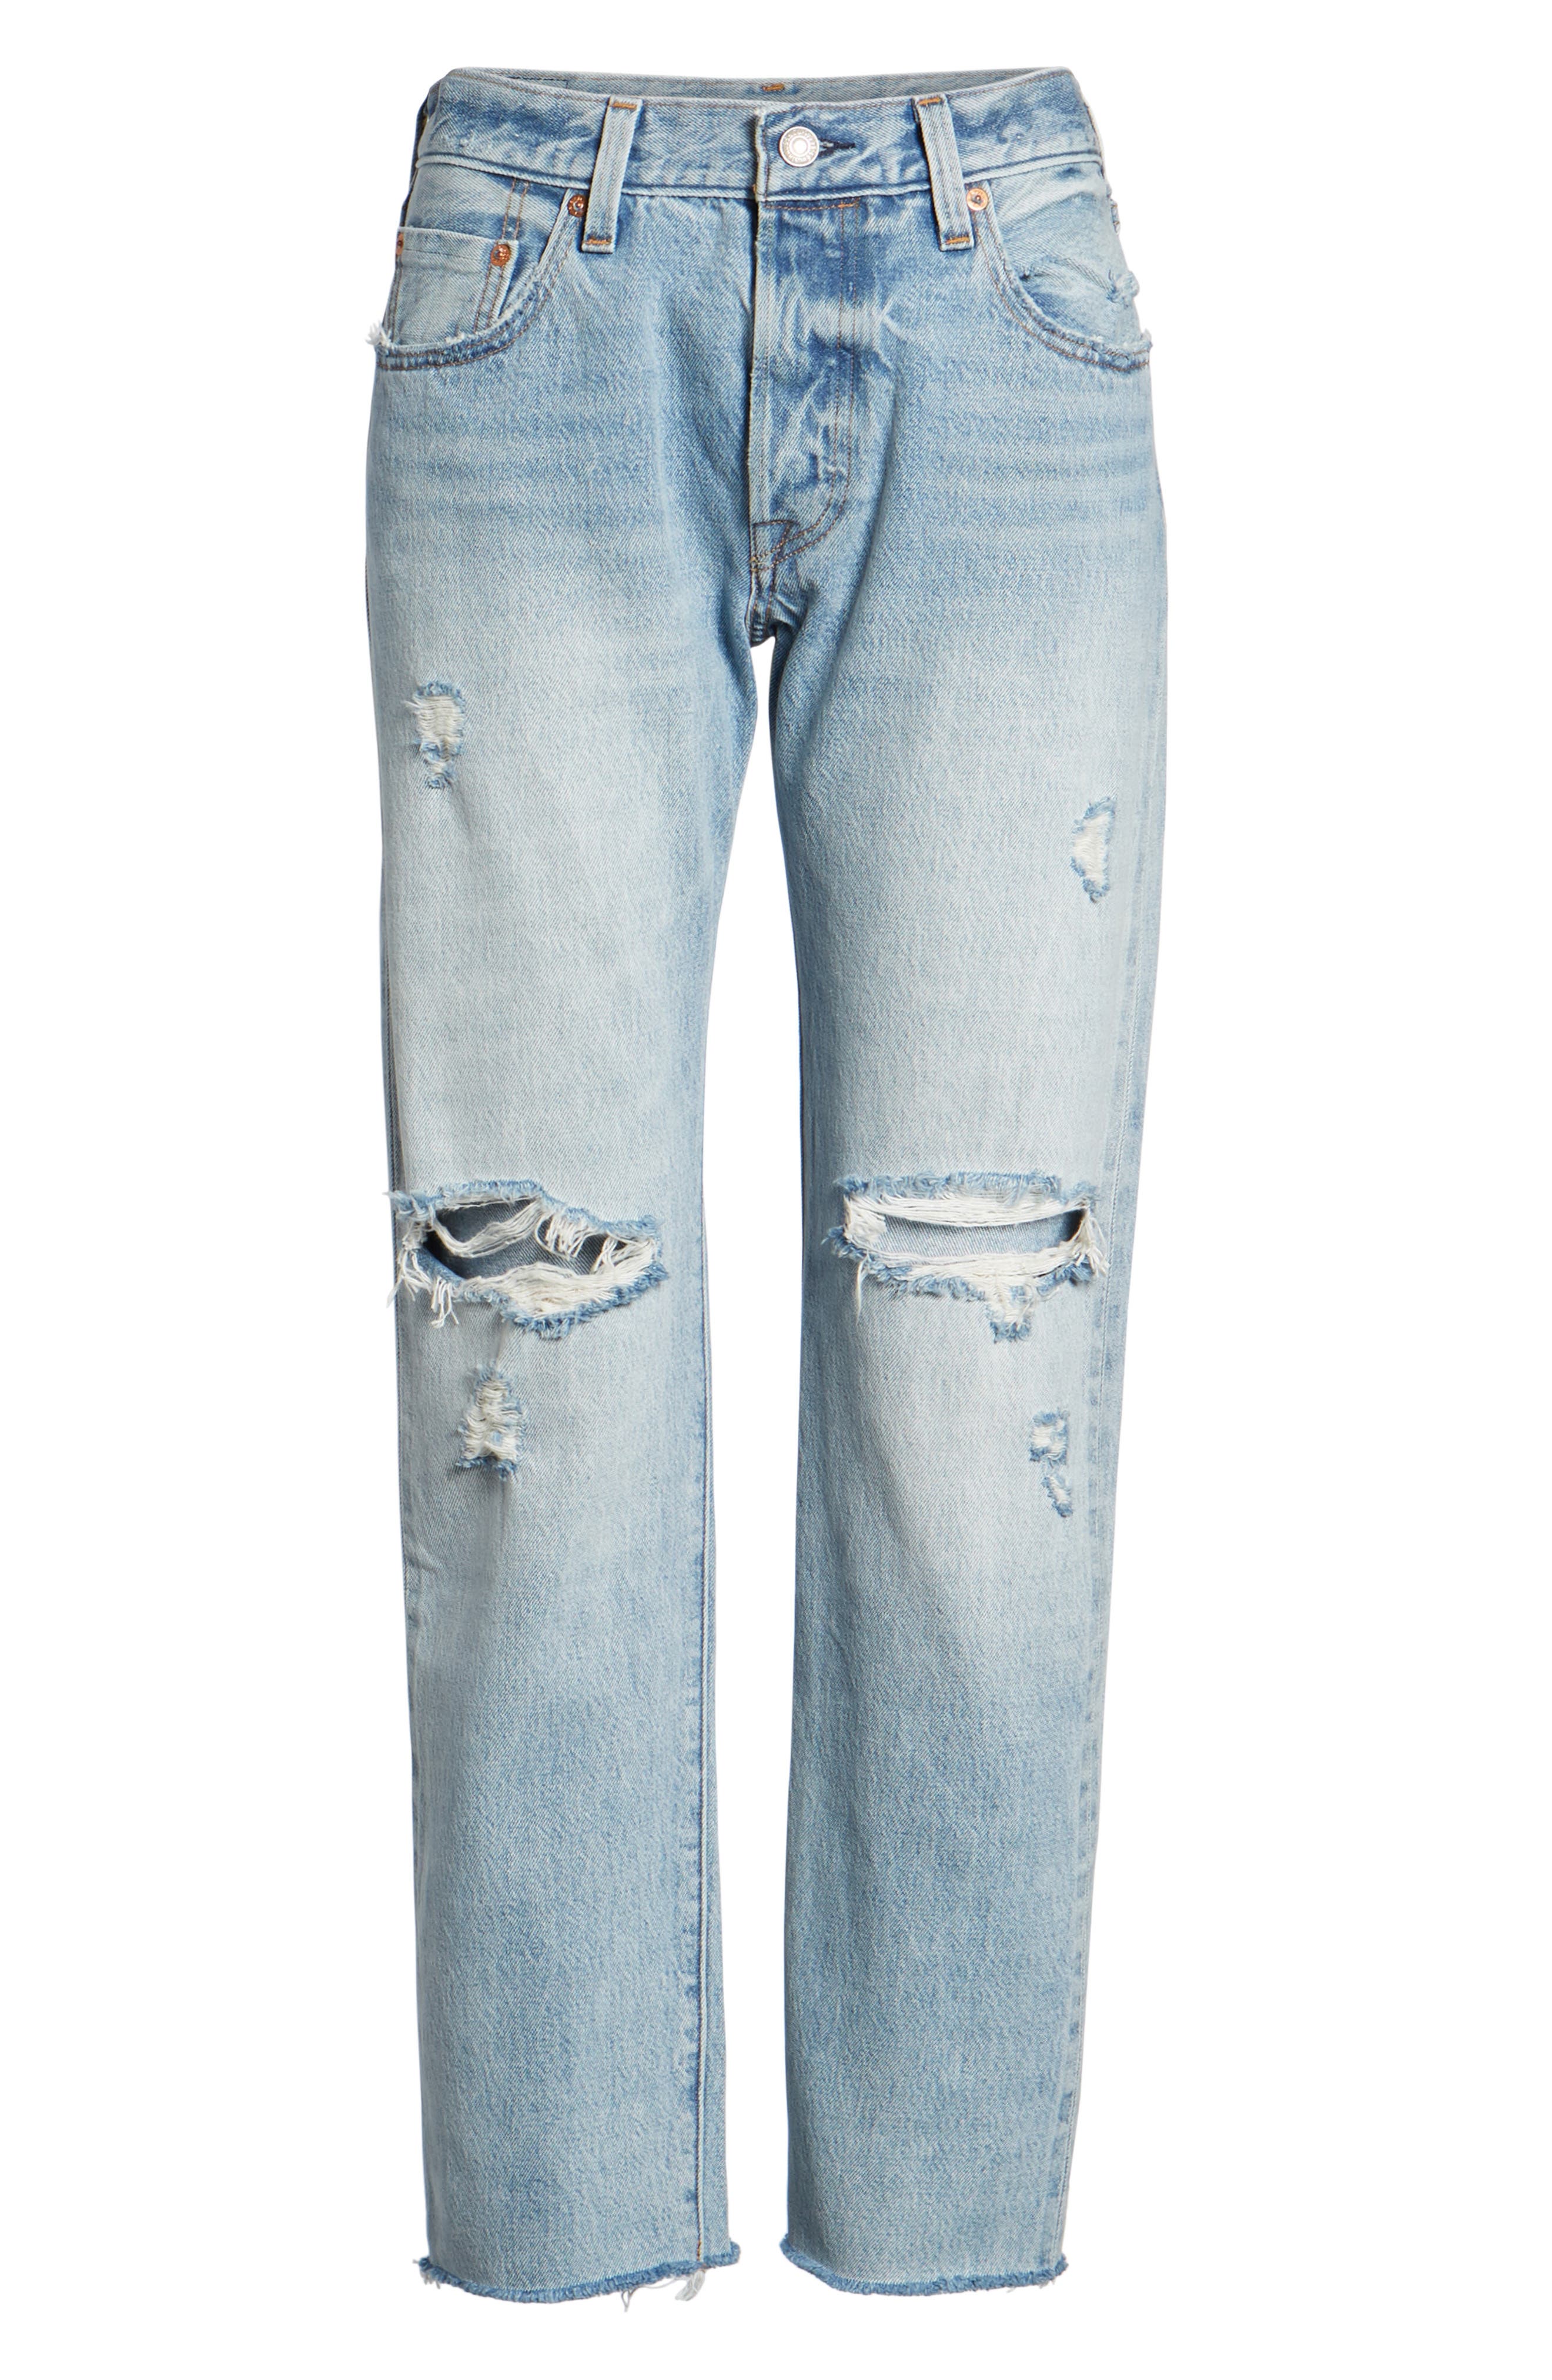 levi's 501 crop jean with rips